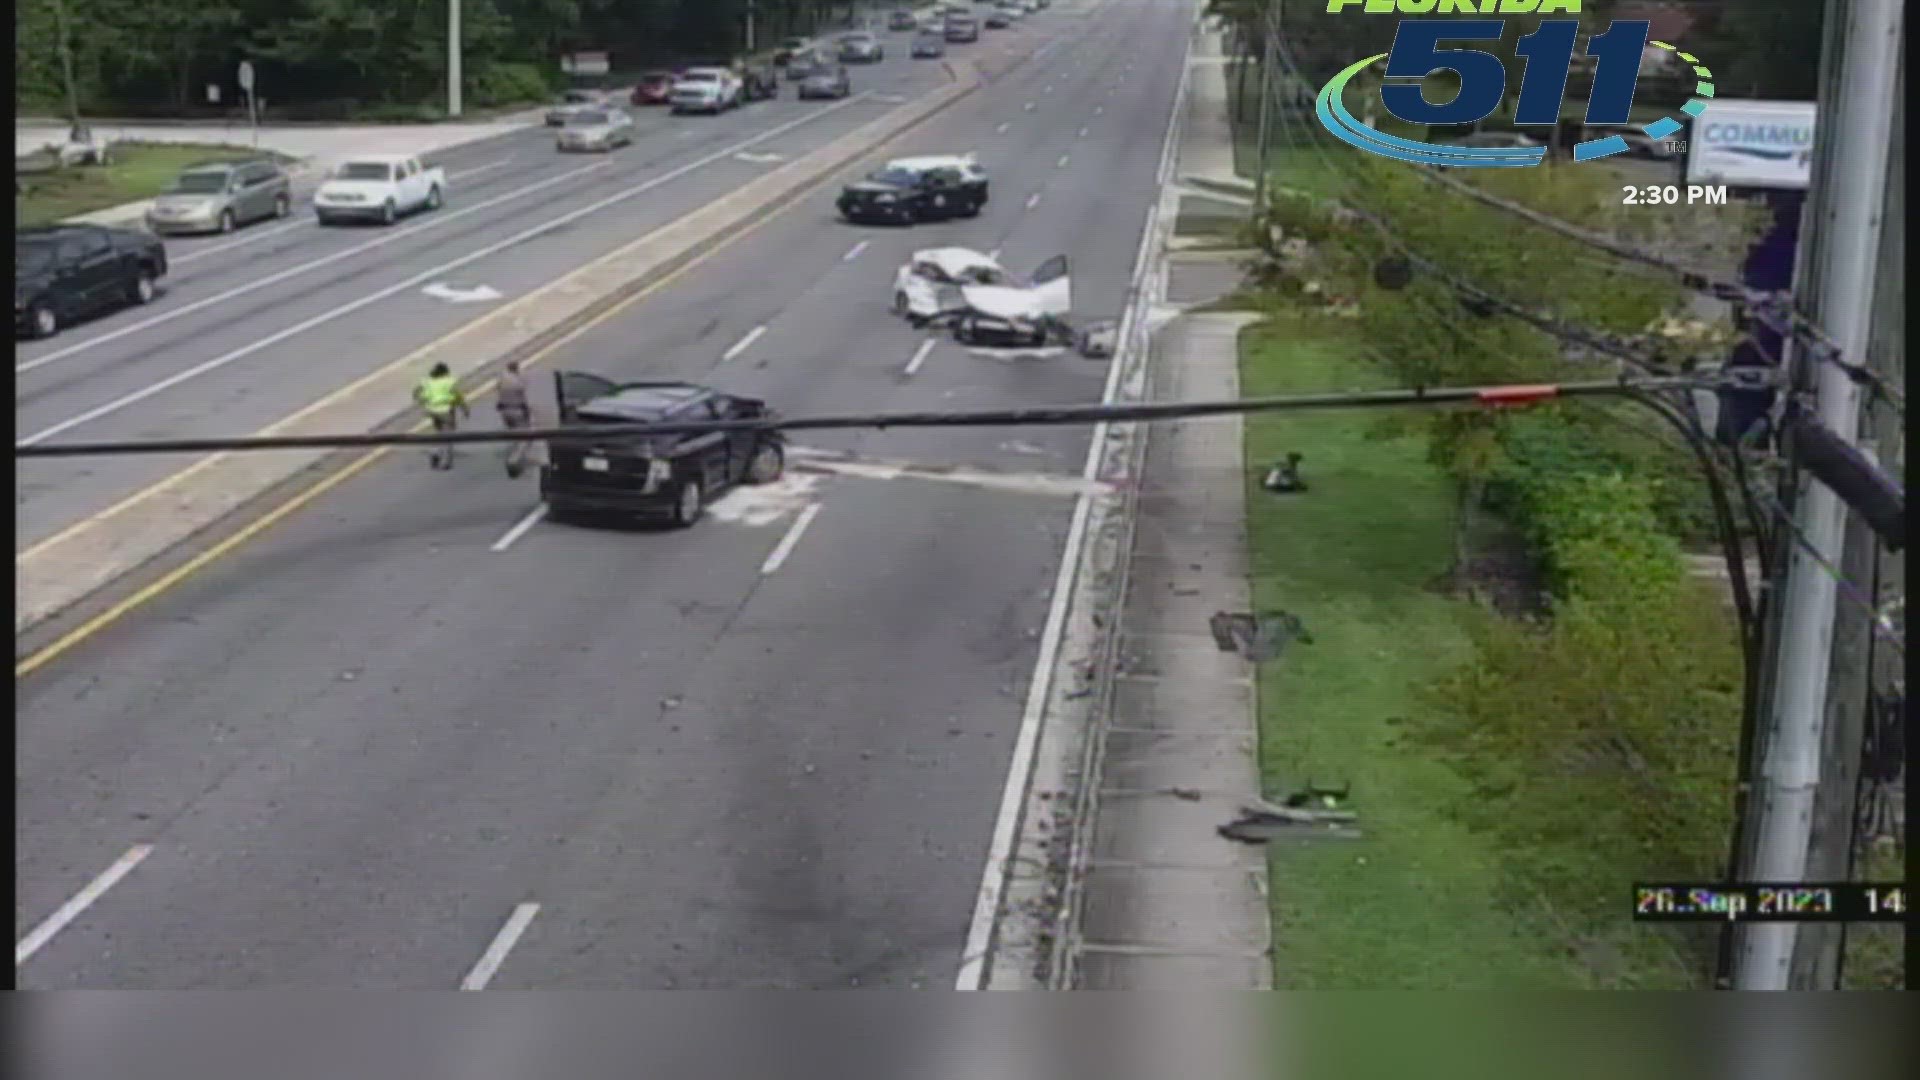 A Florida Highway Patrol accident report states that the driver was in the left turn lane and turned into the path of an SUV traveling in the opposite direction.